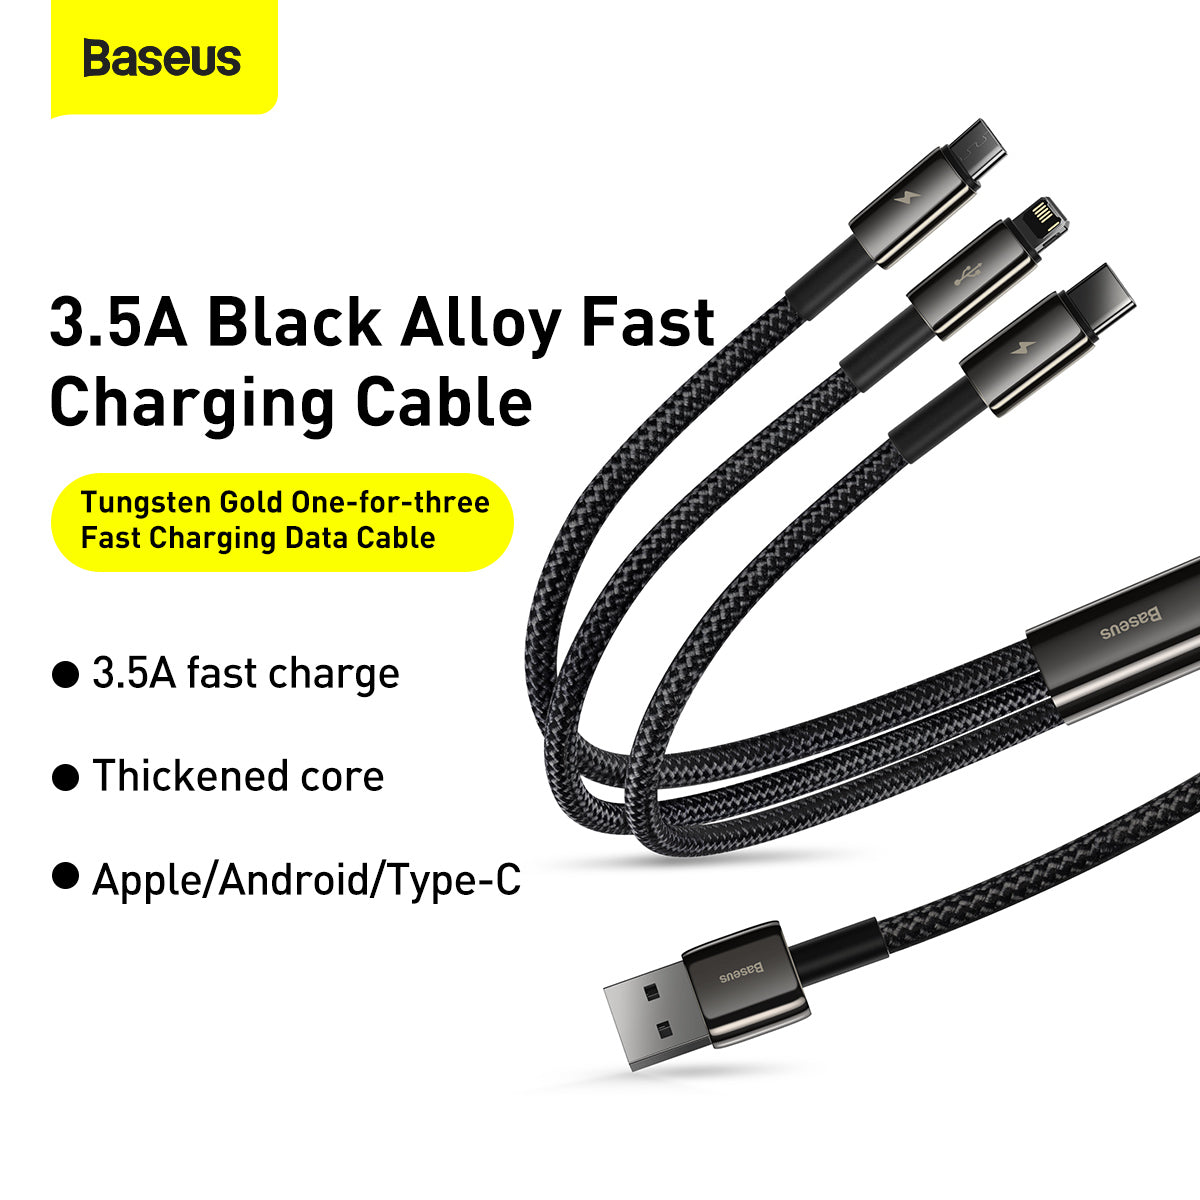 Baseus Tungsten Gold One-For-Three Fast Data Cable USB To M+L+C 3.5A 1.5M Black (CAMLTWJ-01)